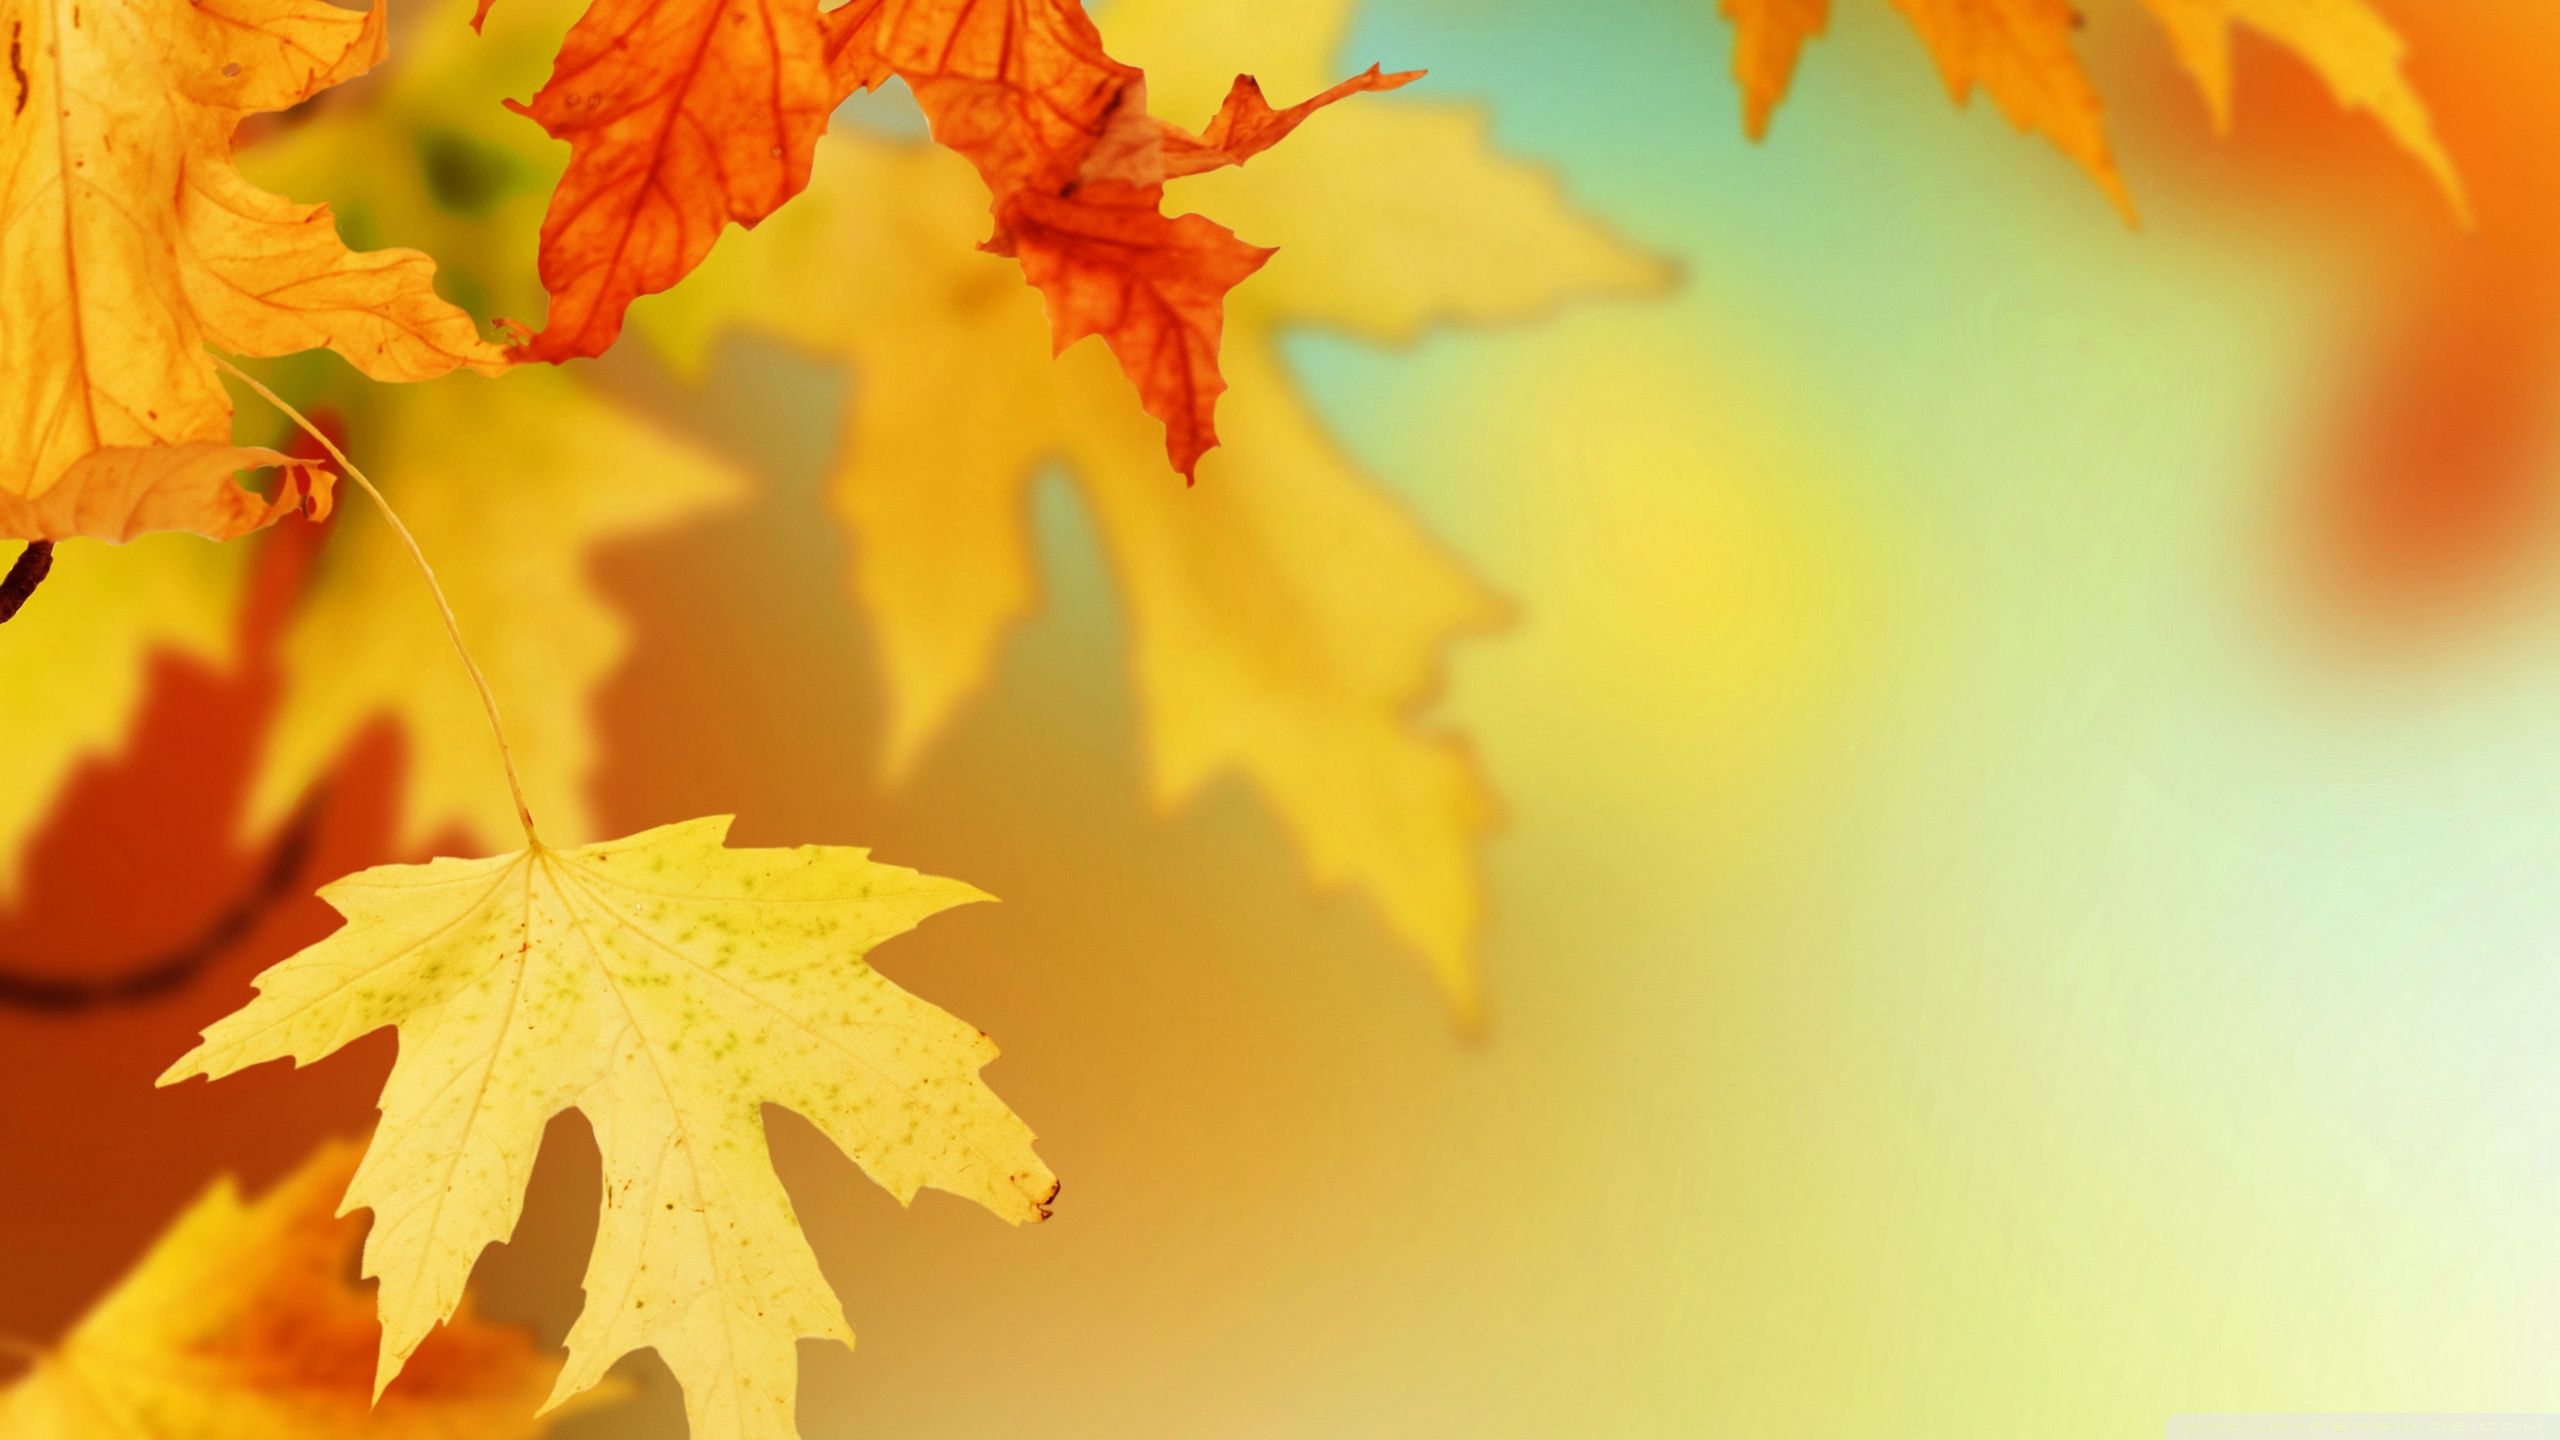 Fall Festival Background | HD Wallpapers for Free